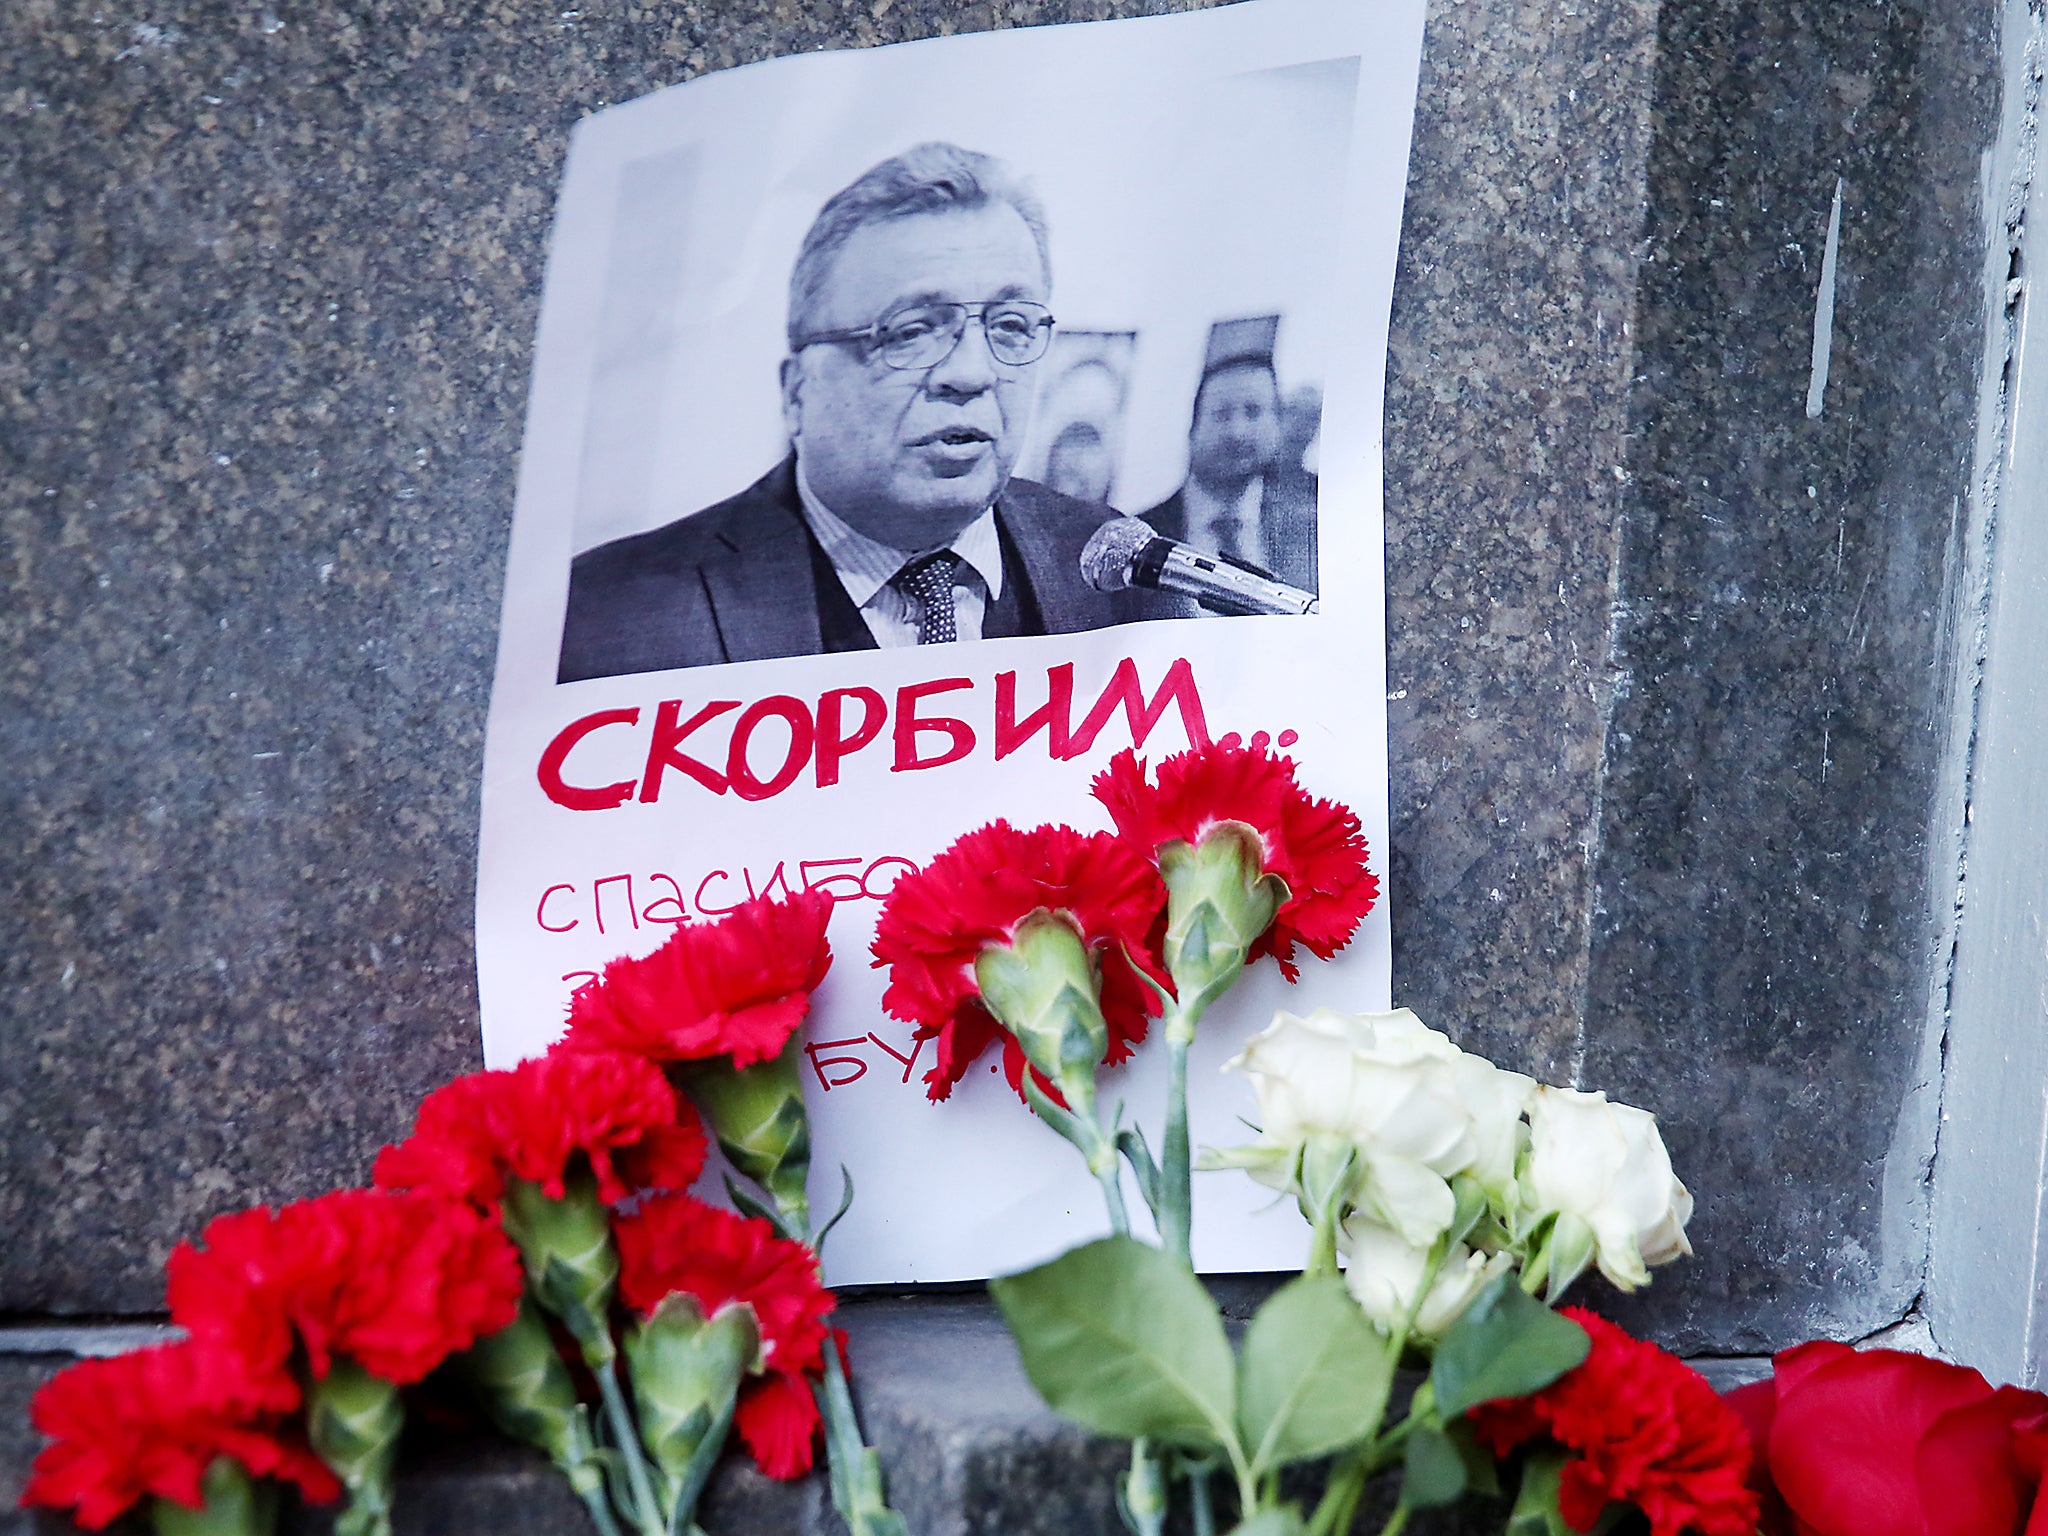 Flowers at the entrance to the Russian Foreign Affairs Ministry building in Moscow, paying tribute to the murdered ambassador to Turkey, Andrei Karlov